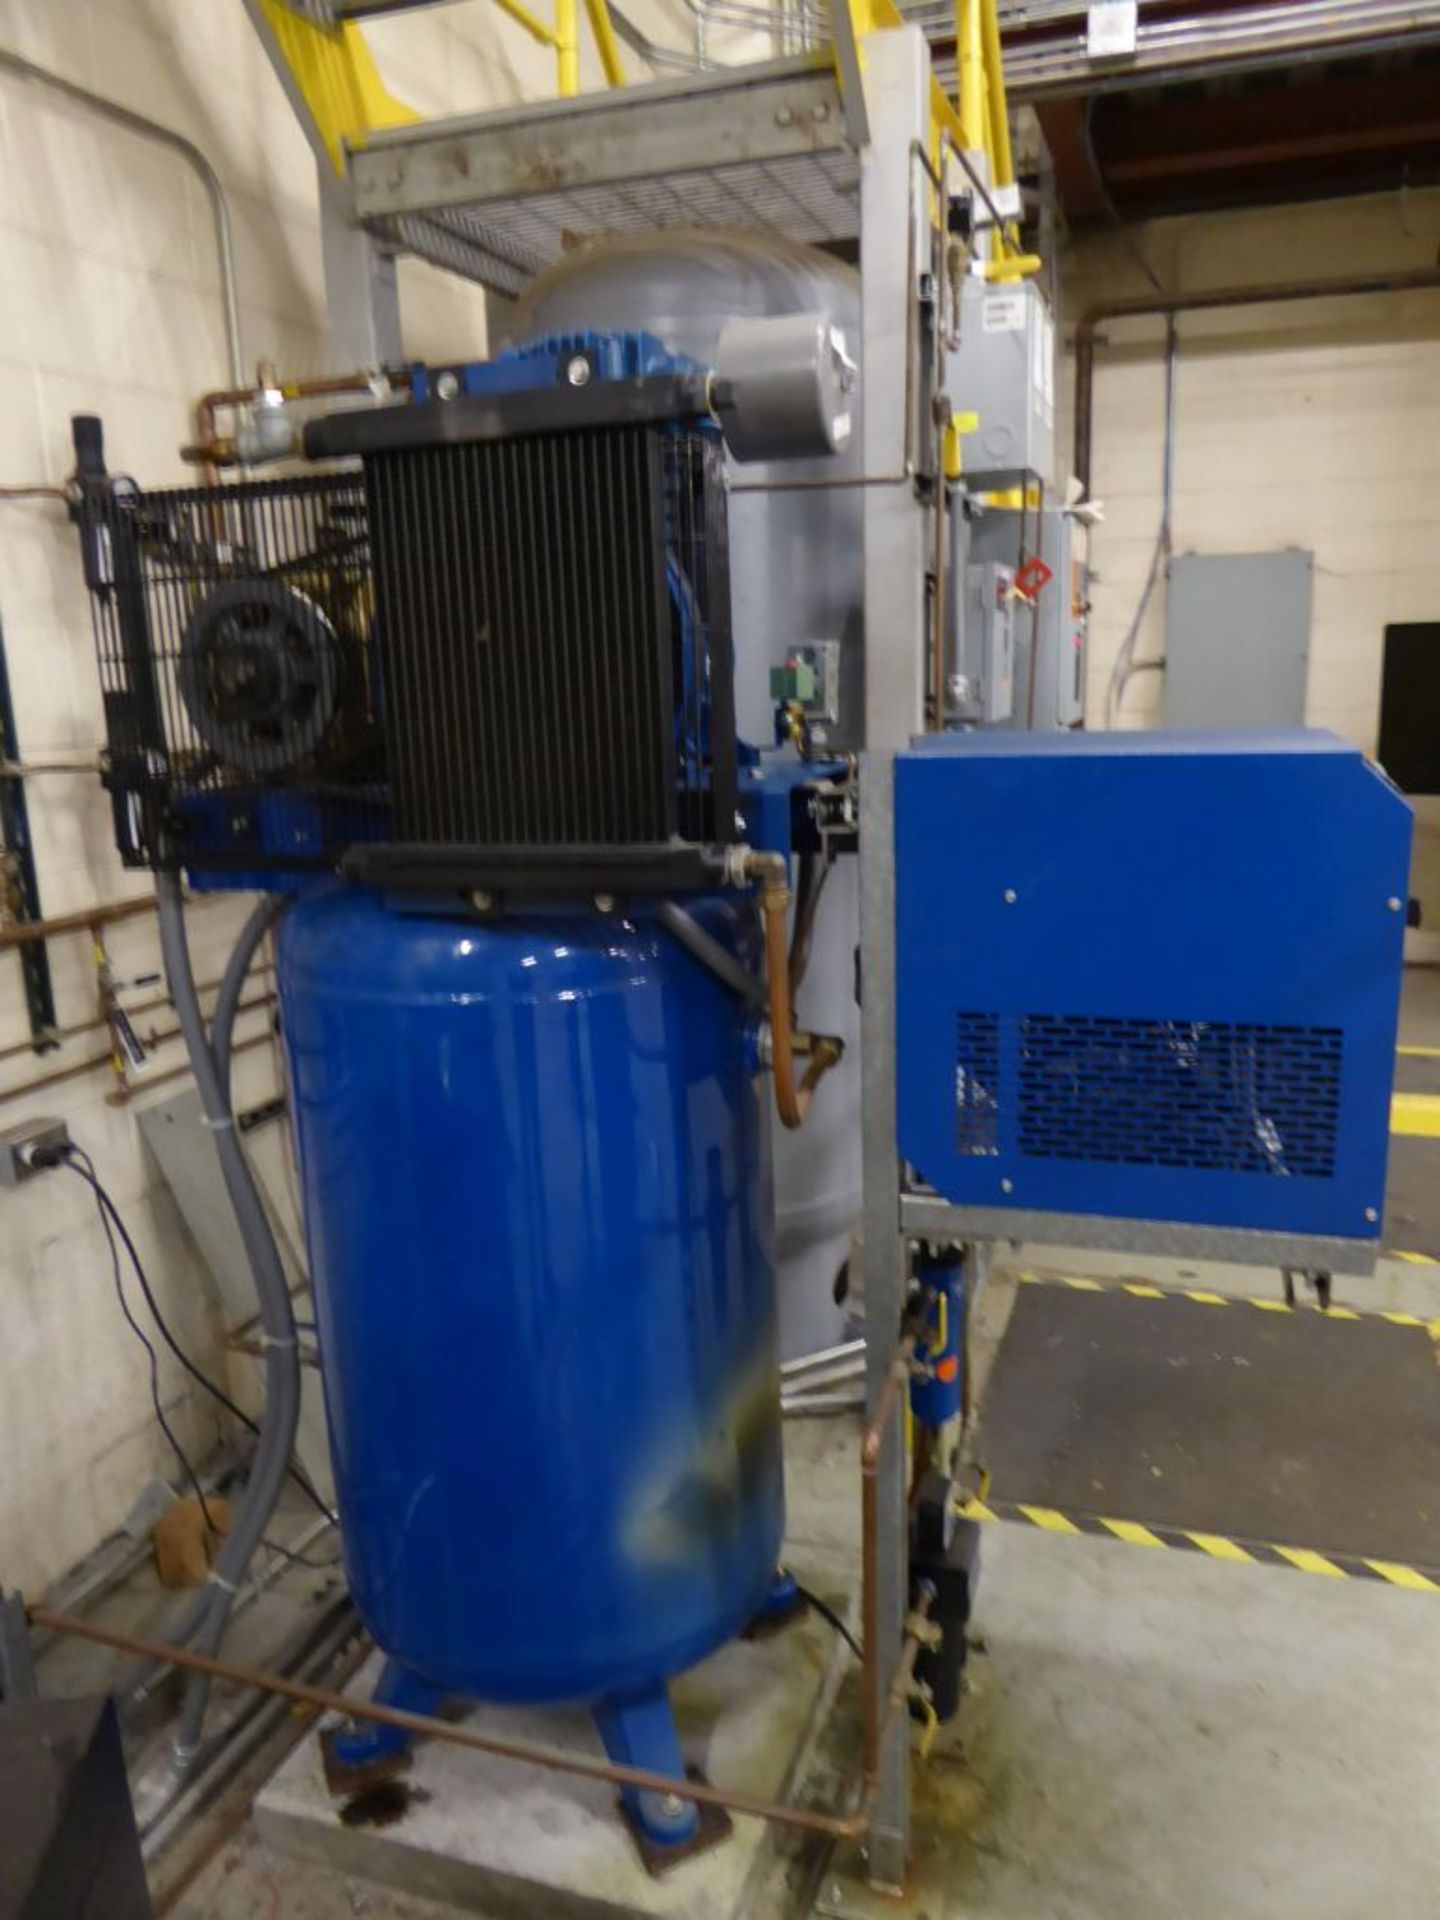 Charlotte, NC - 2015 Quincy QP 7.5 Compressor - Image 3 of 6